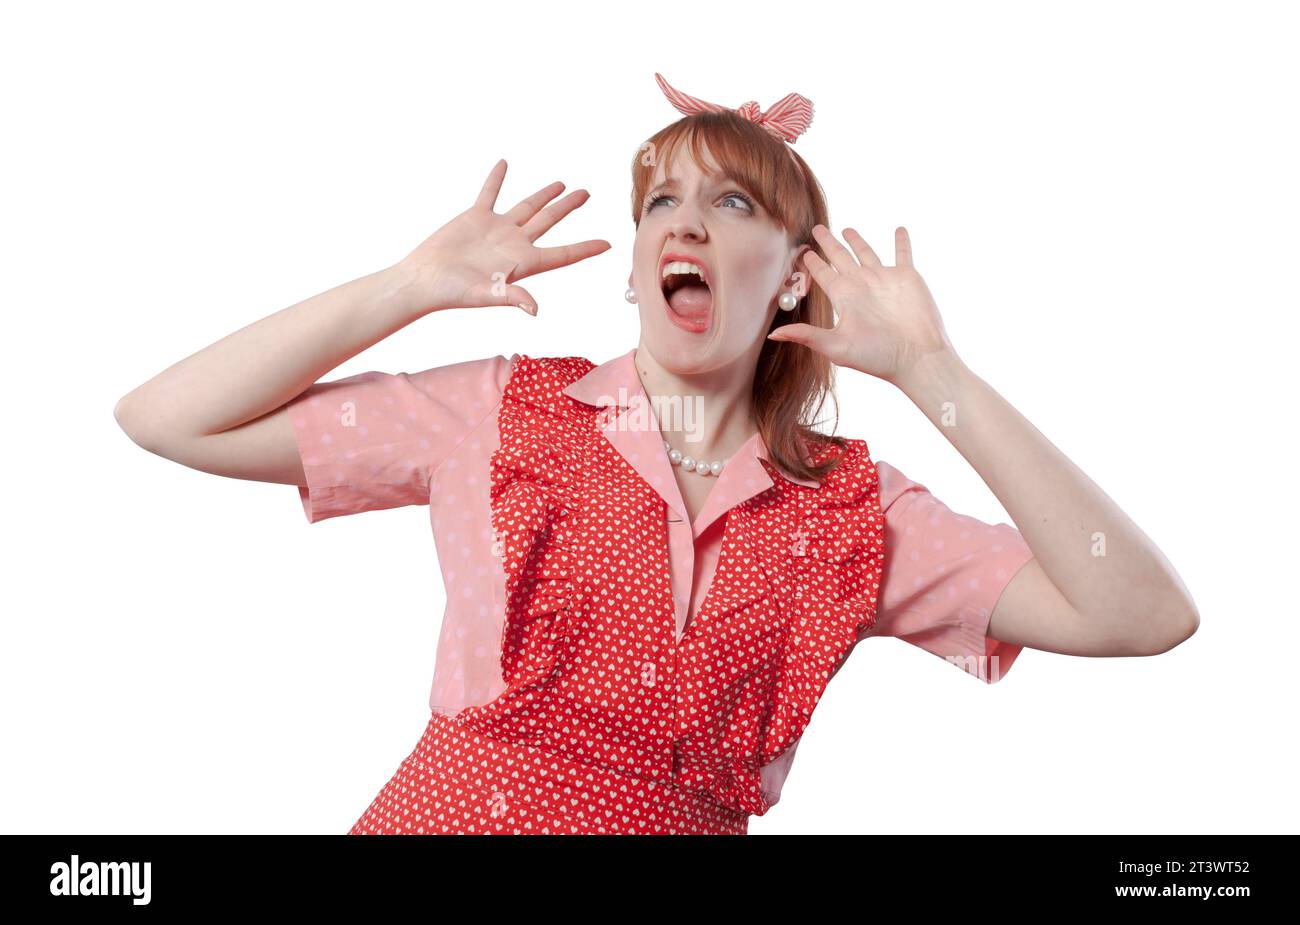 Funny old style housewife shouting out loud, she is stressed and angry Stock Photo